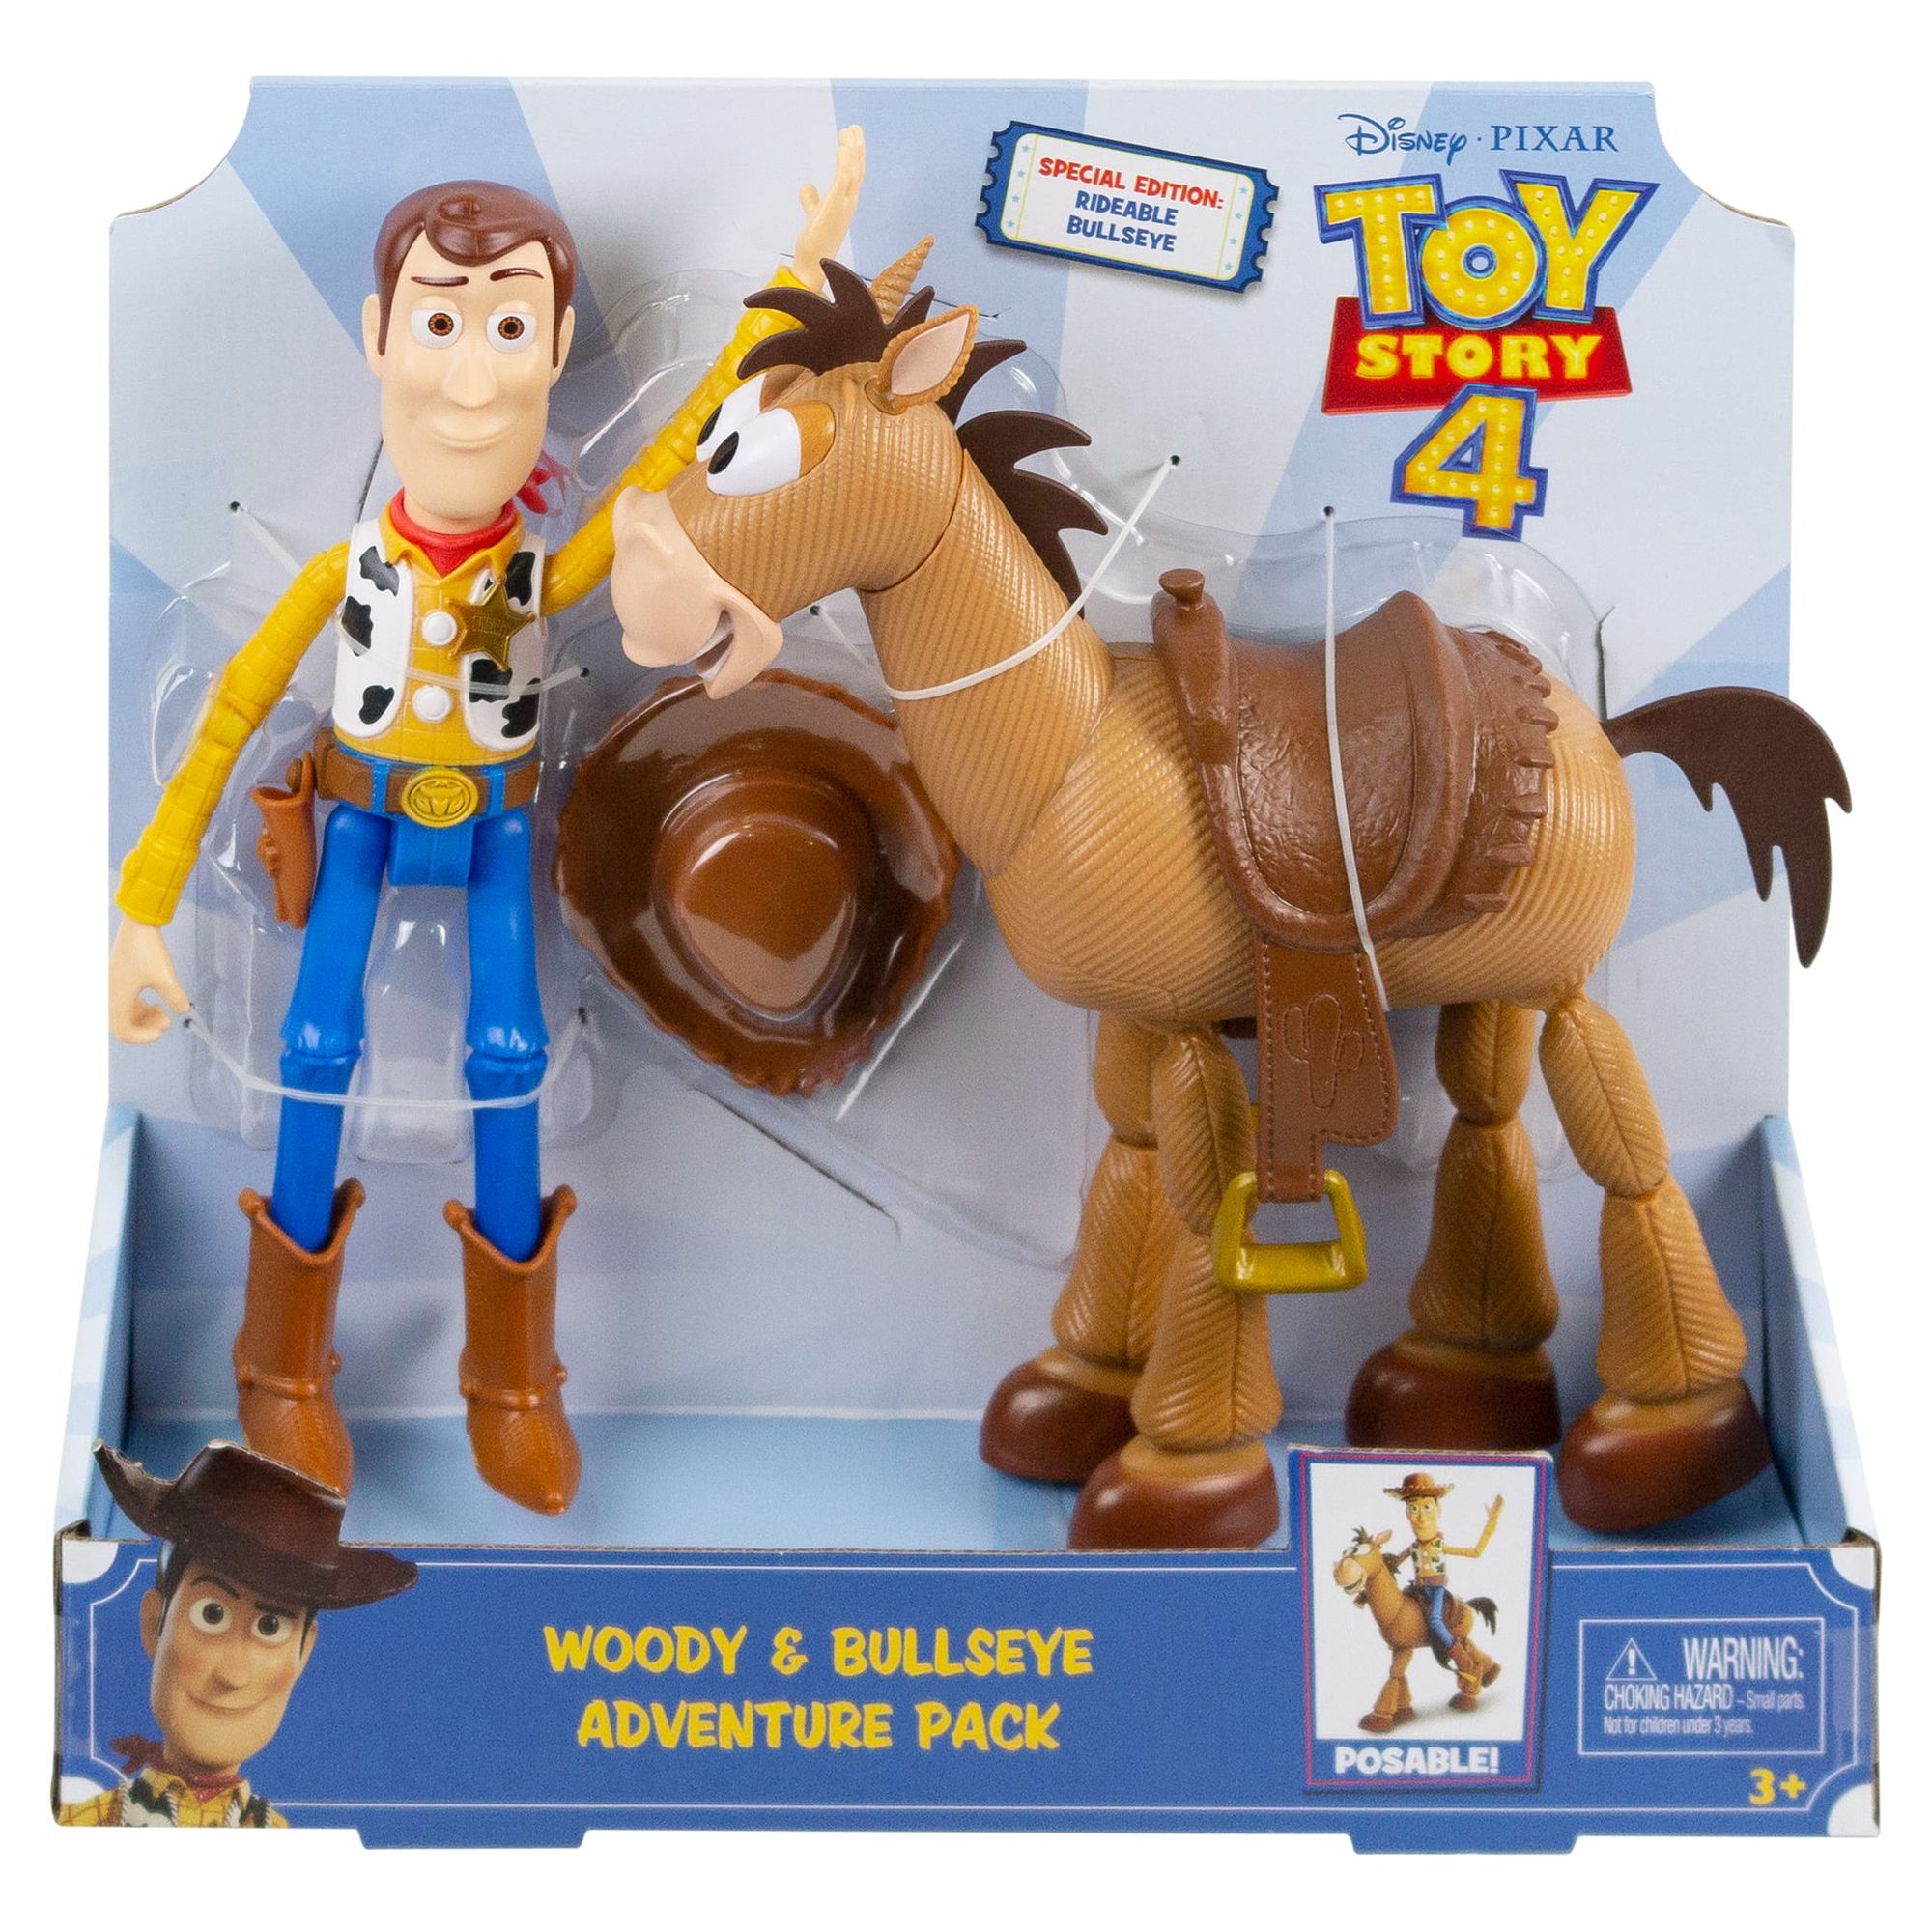 Award Winning Disney/Pixar Toy Story 4 Woody And Buzz Lightyear 2-Character Pack, Movie-Inspired Relative-Scale For Storytelling Play - image 8 of 8